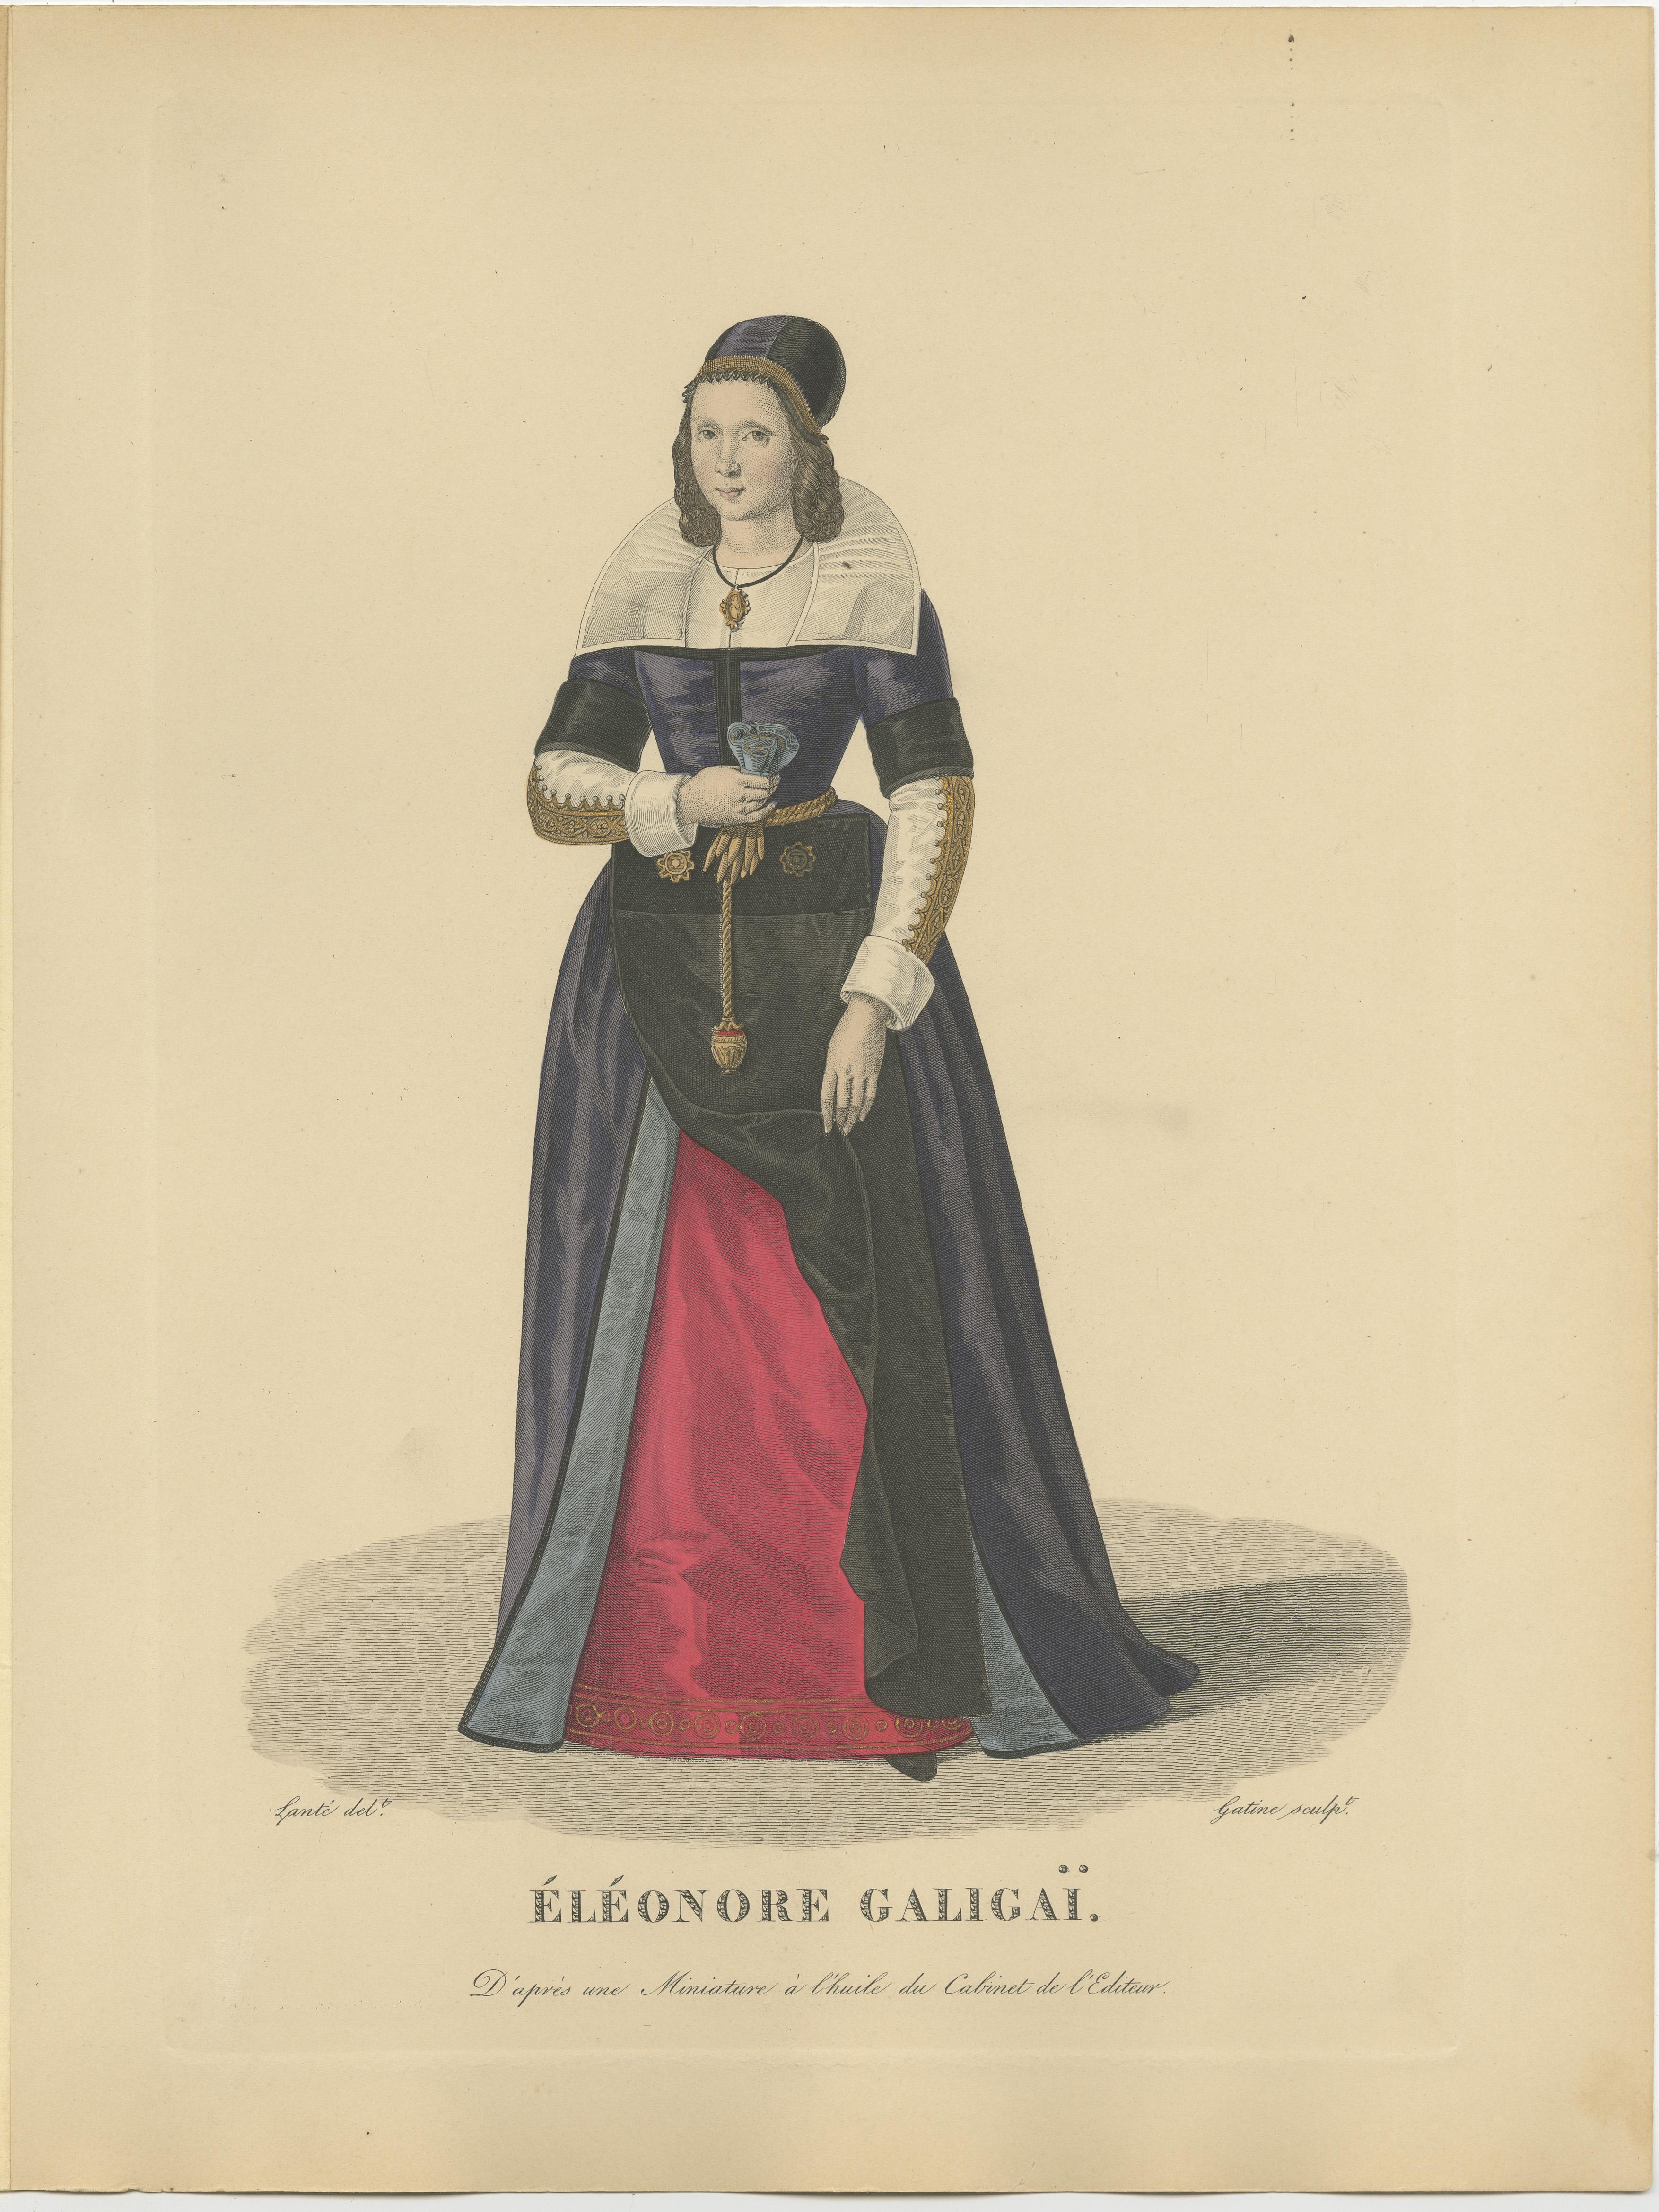 Antique print titled 'ELEONORE GALIGAI' Original antique print of Leonora Dori Galigaï.

Leonora Dori Galigaï (19 May 1568 – 8 July 1617) was a French courtier of Italian origin, an influential favourite of the French regent Marie de' Medici,